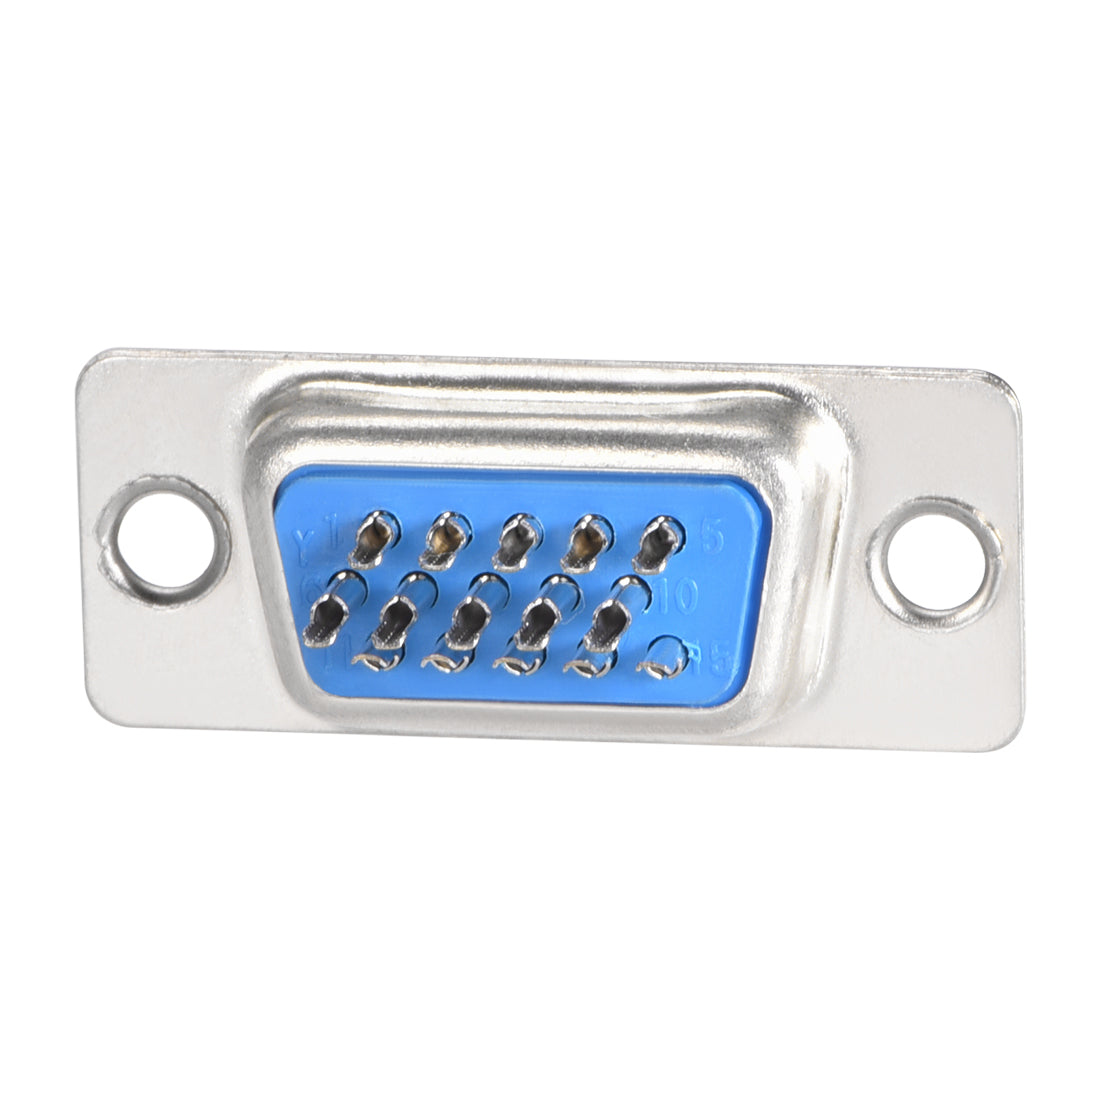 uxcell Uxcell D-sub Connector Female Socket 15-pin 3-row Port Terminal Breakout for Mechanical Equipment CNC Computers 1pc